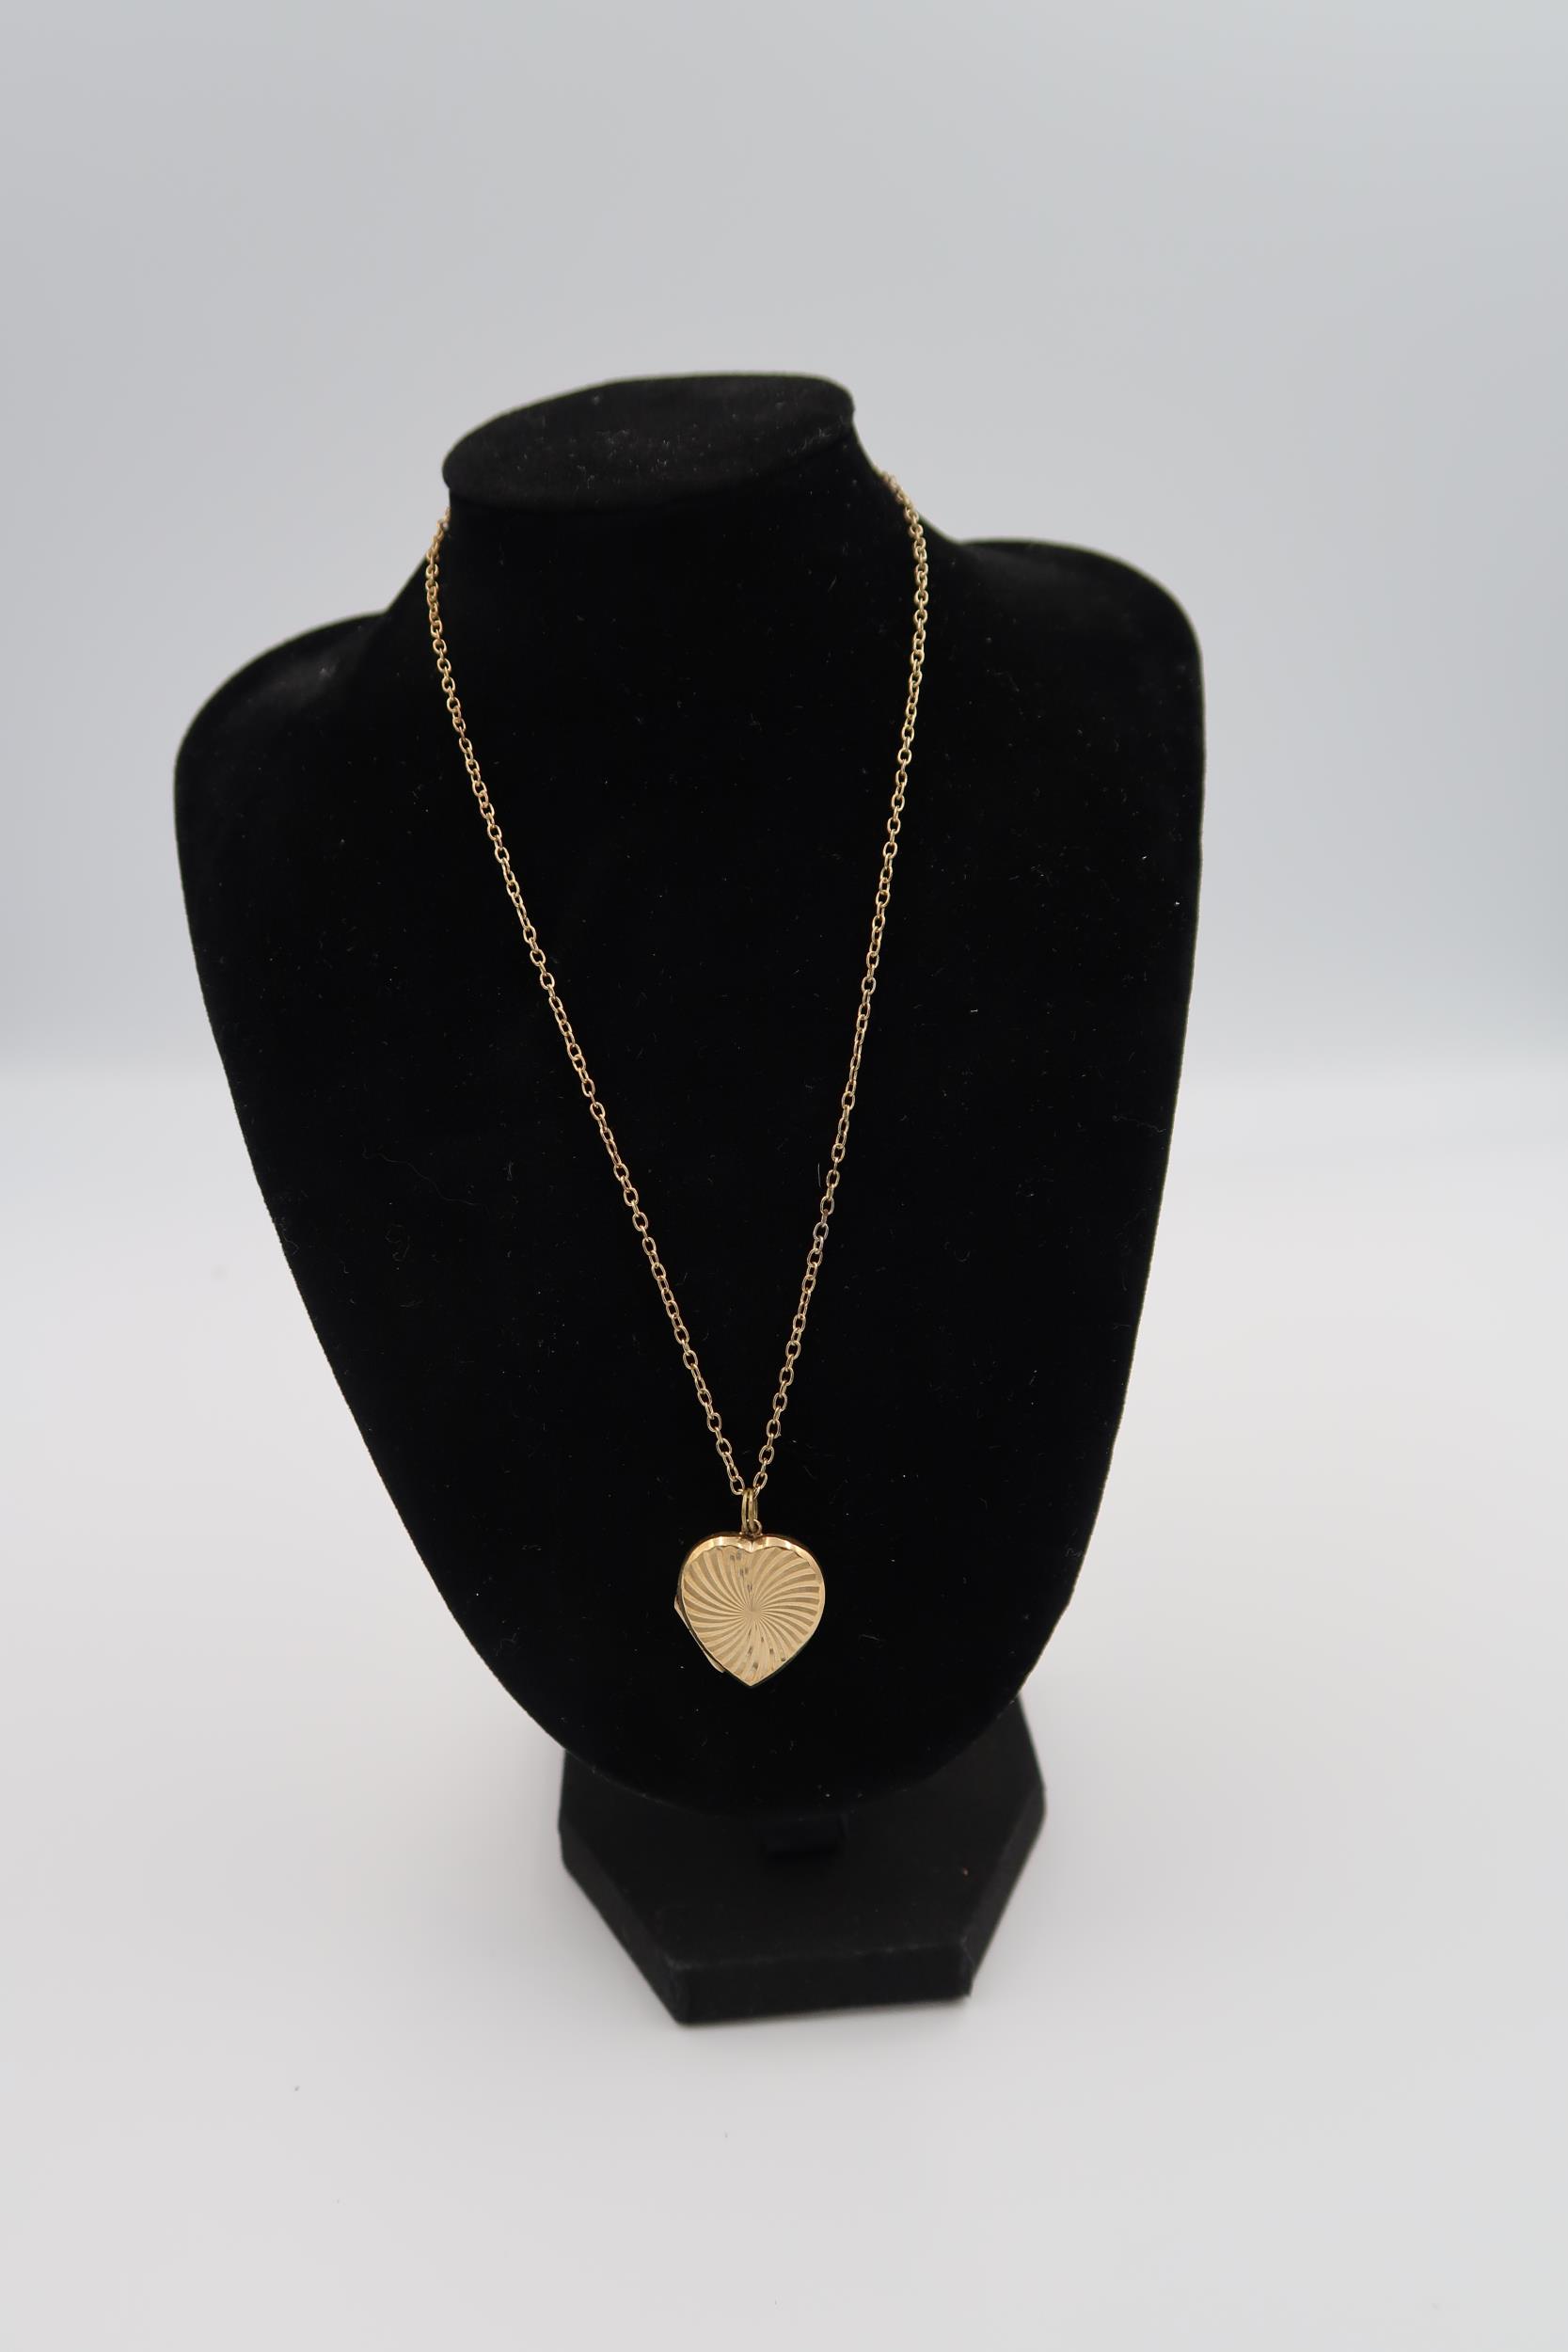 Six 9ct gold lockets, two on chains, total weight 16.4 grams.